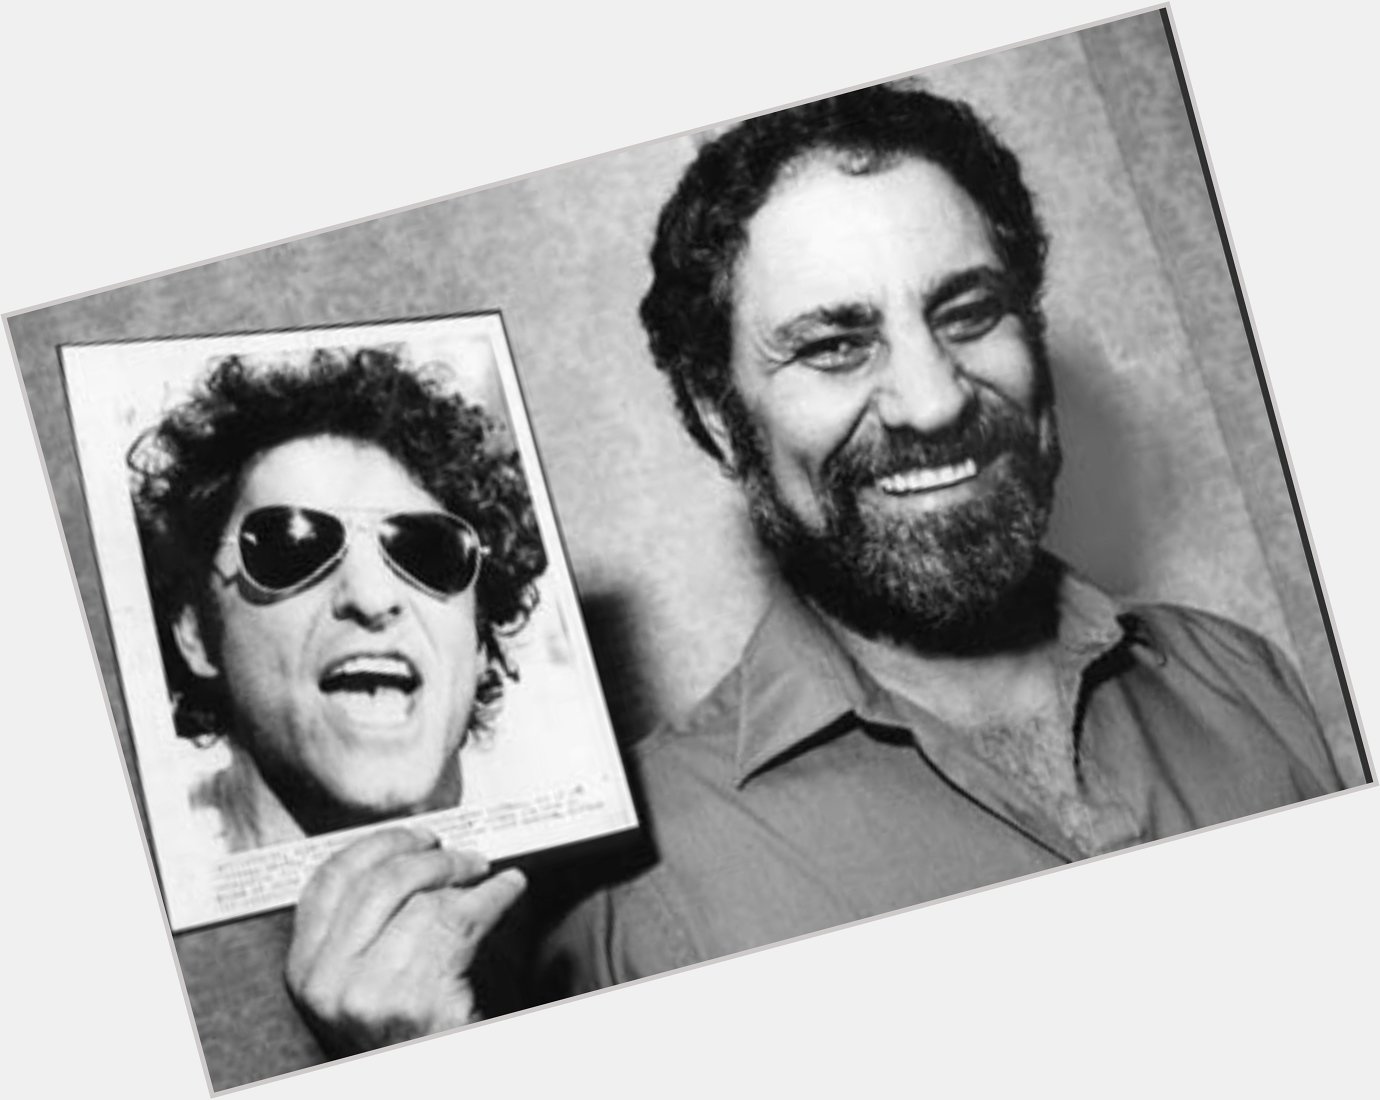 Happy birthday Abbie Hoffman.  Unfortunately Worcester\ s still not ready to embrace and celebrate your work. 